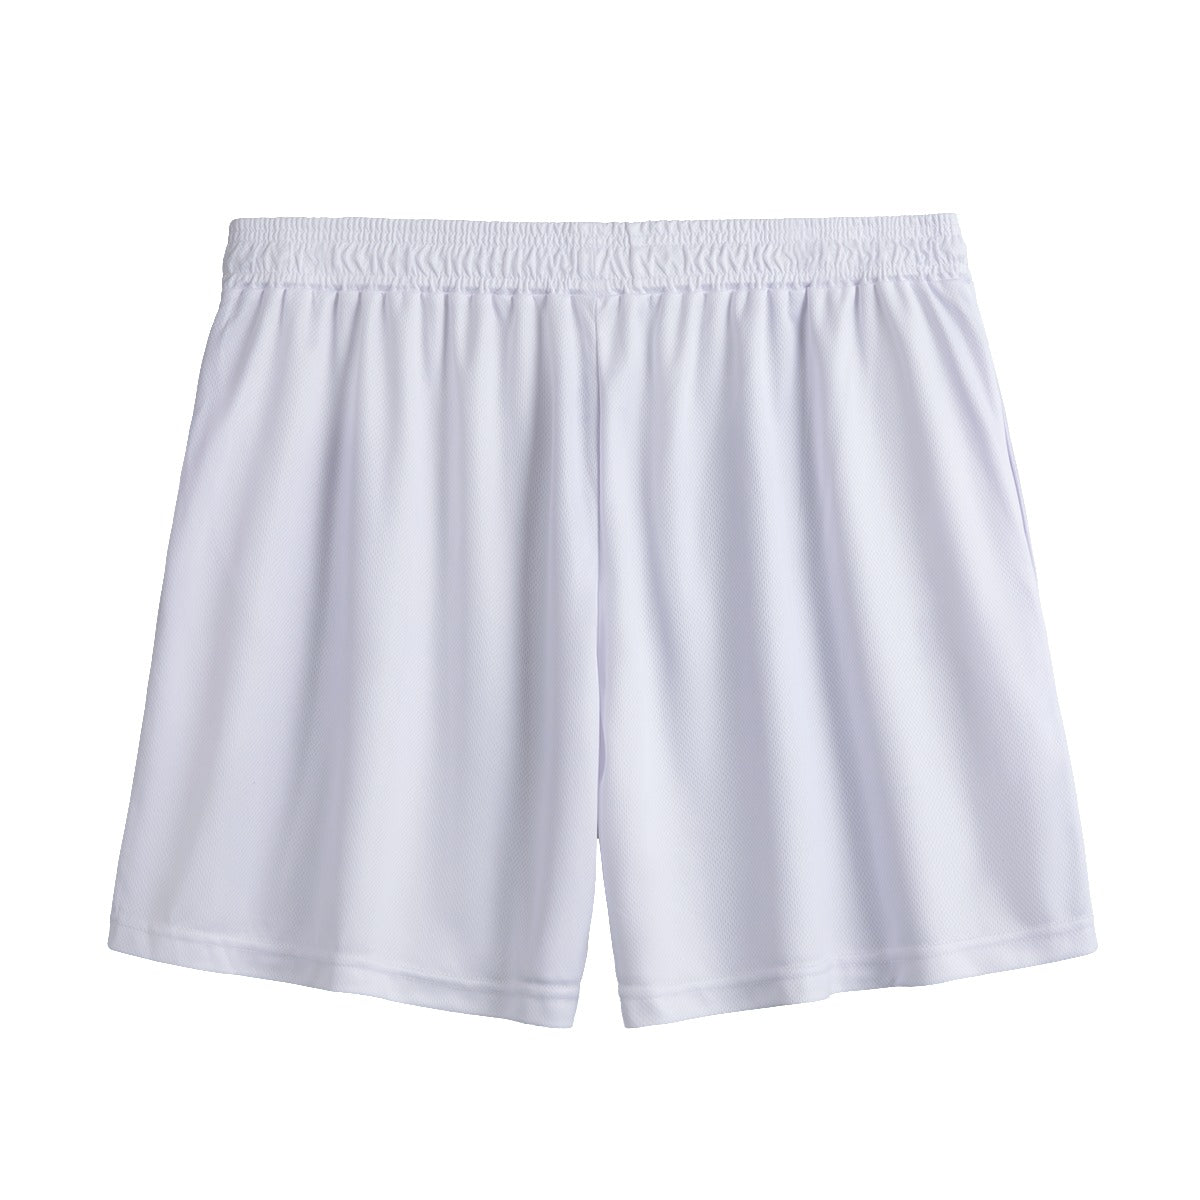 Tennessee Mesh Shorts